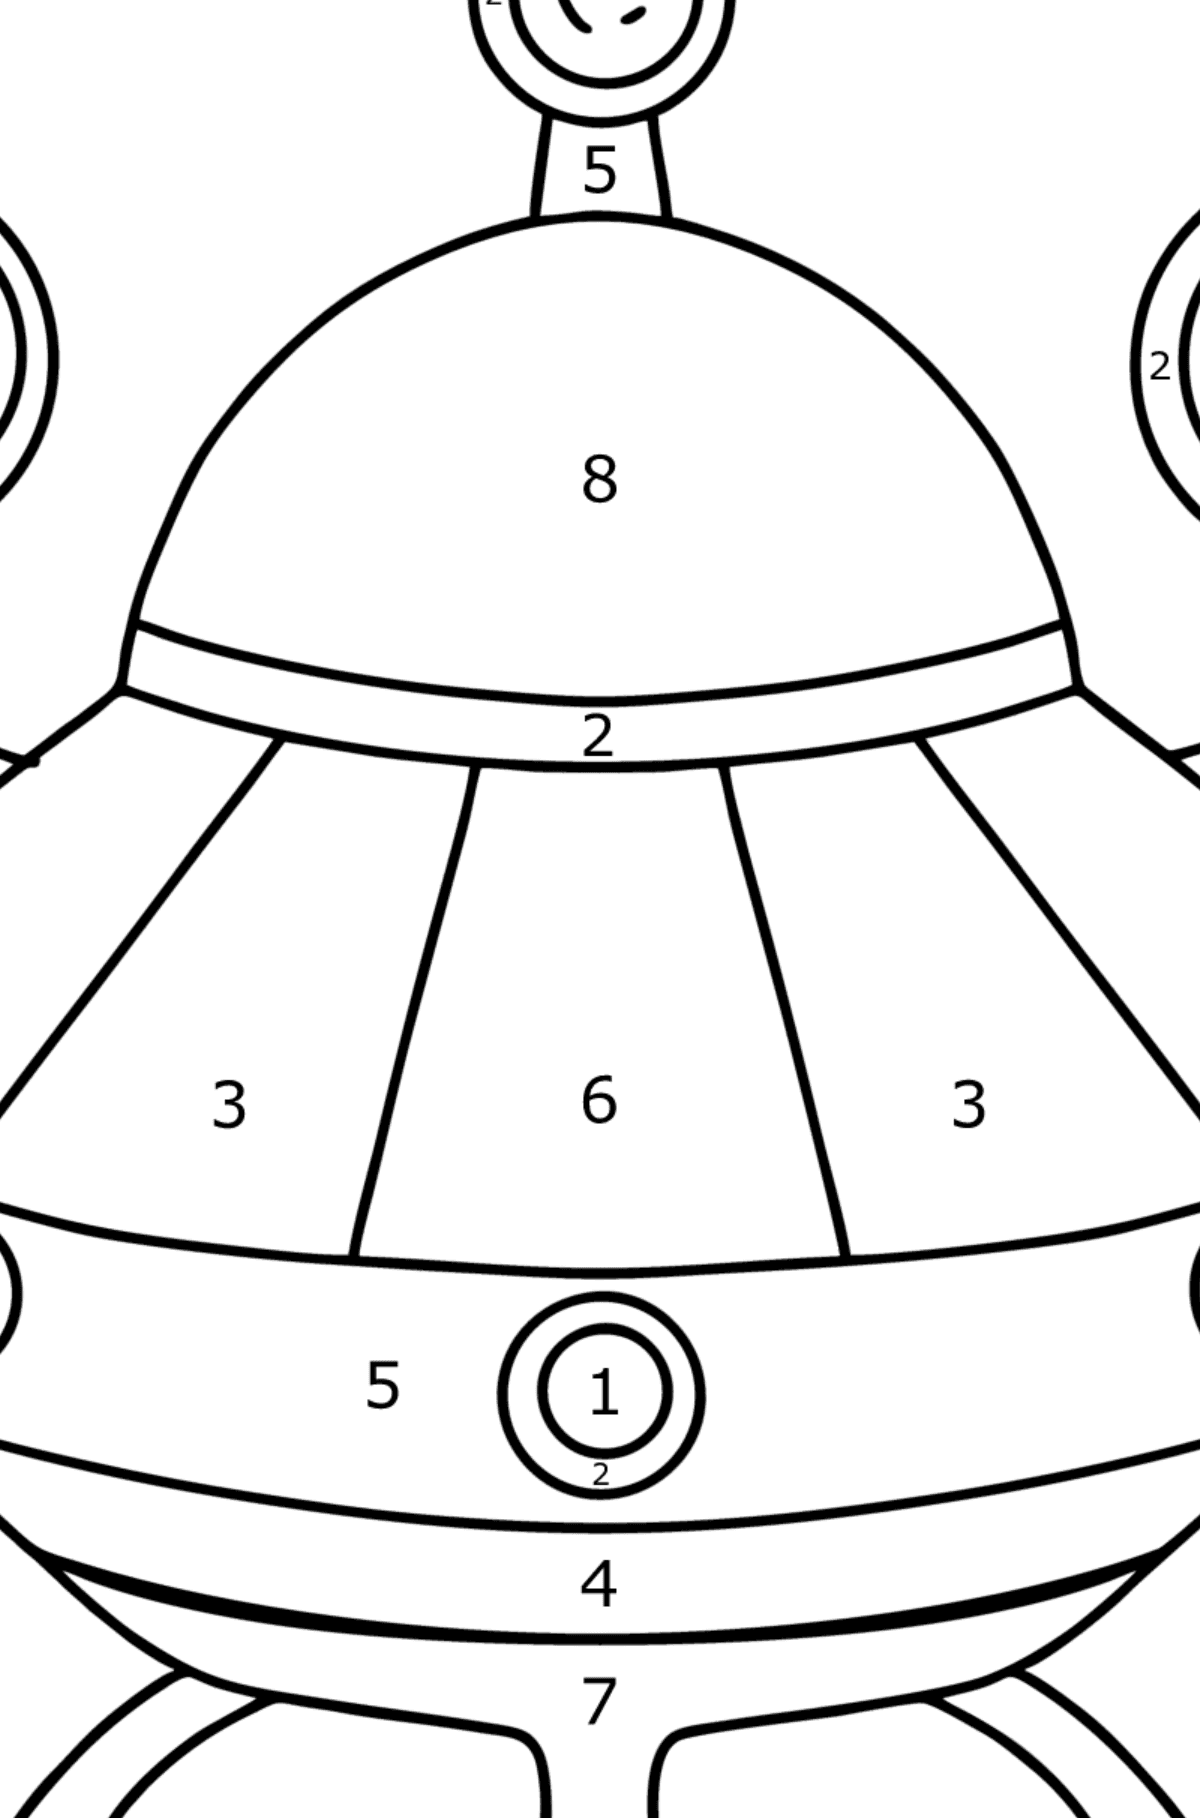 Alien spaceship coloring pages - Coloring by Numbers for Kids